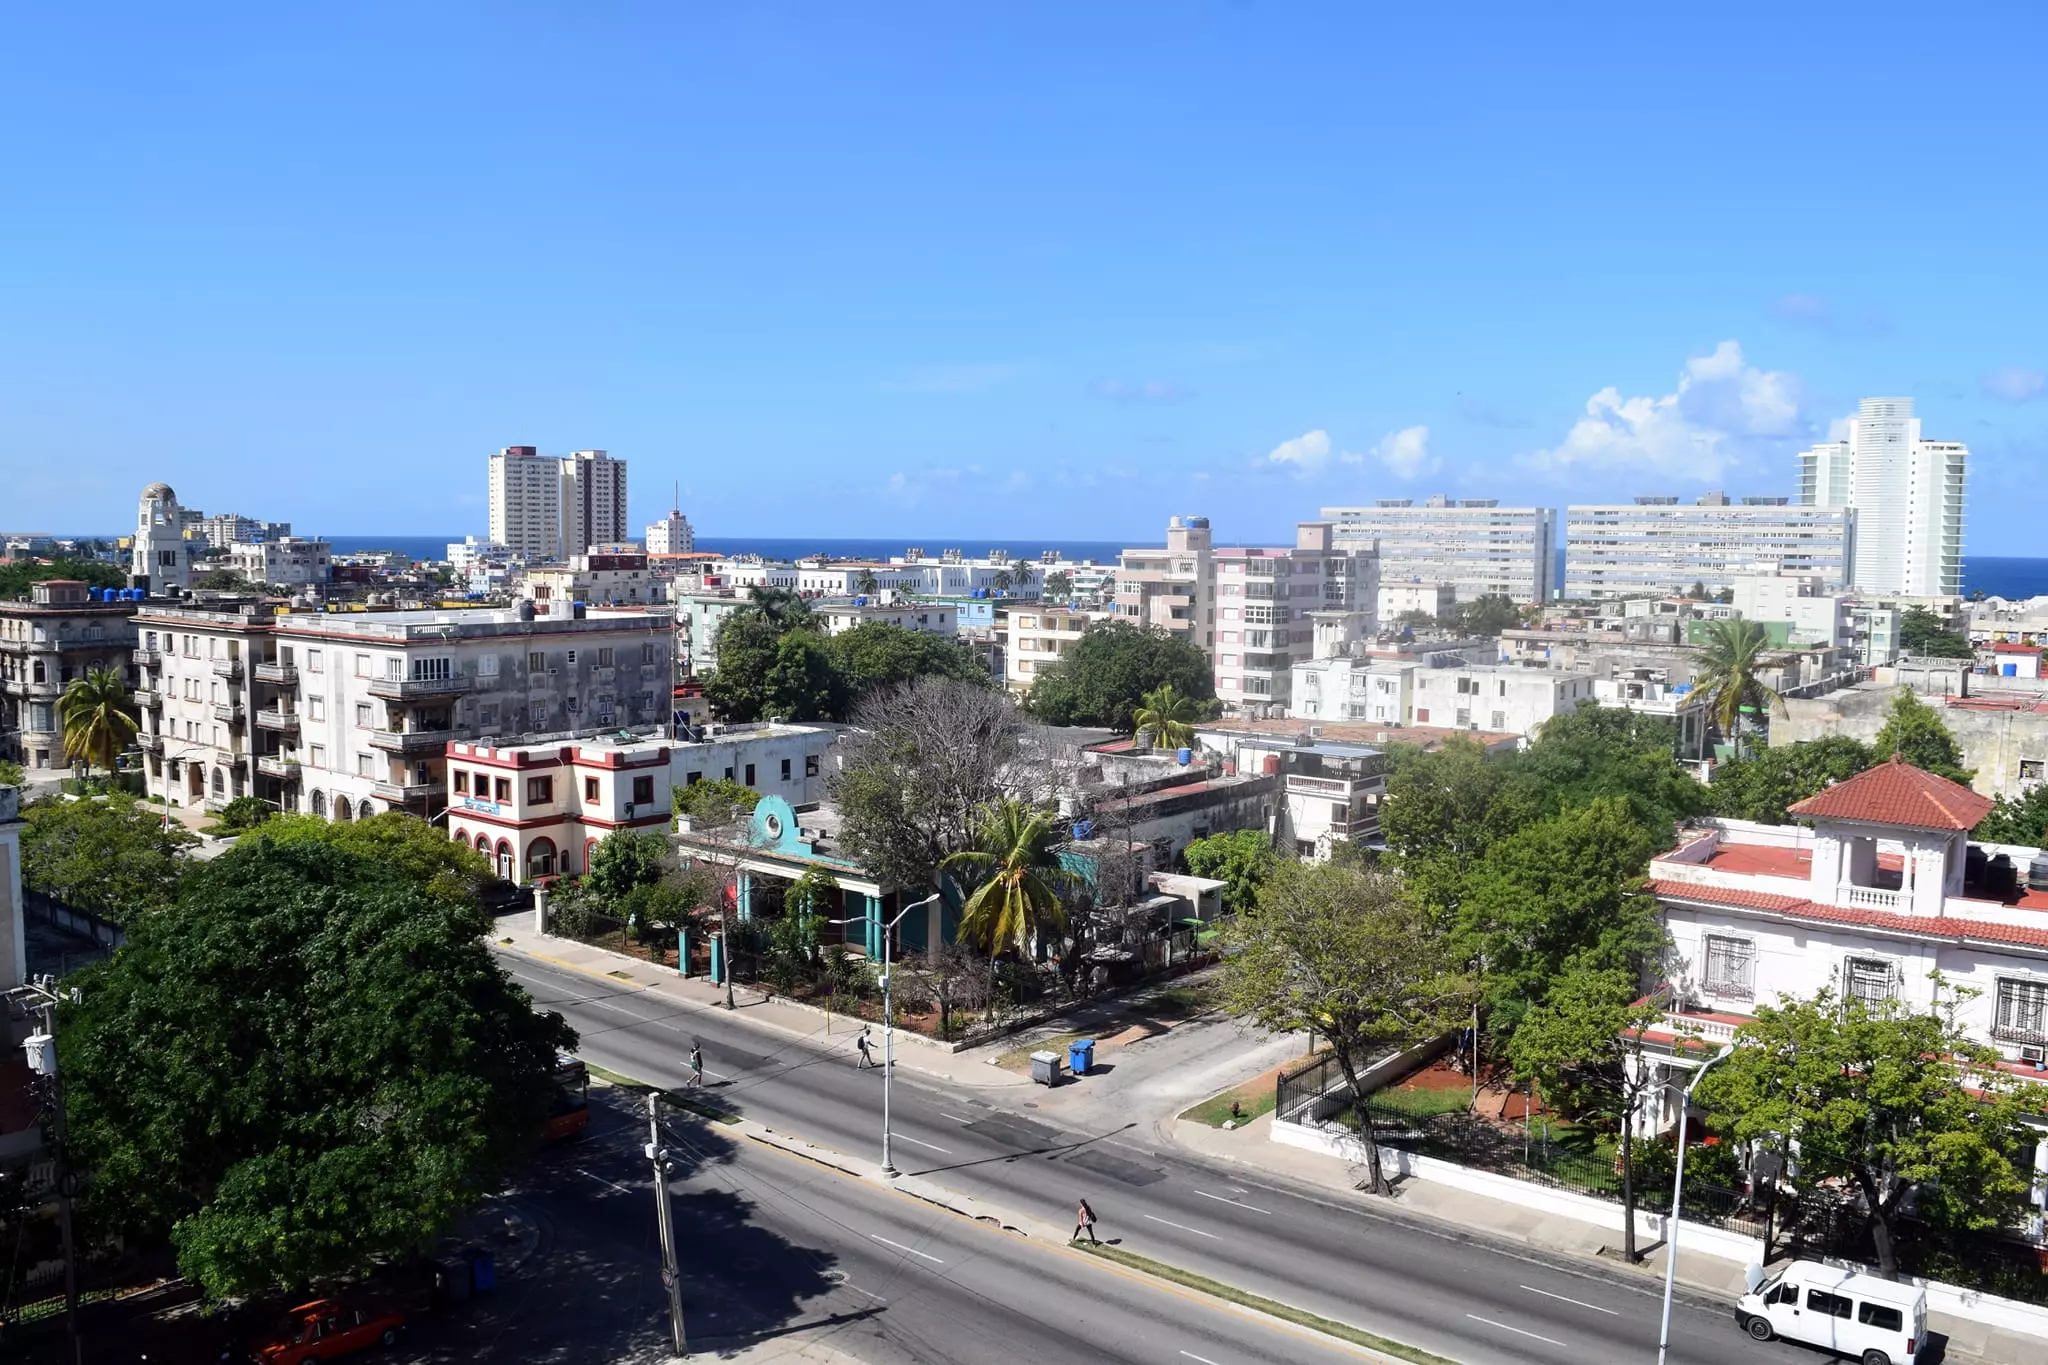 Are You planning a trip to Havana,Cuba? We have a nice renthal